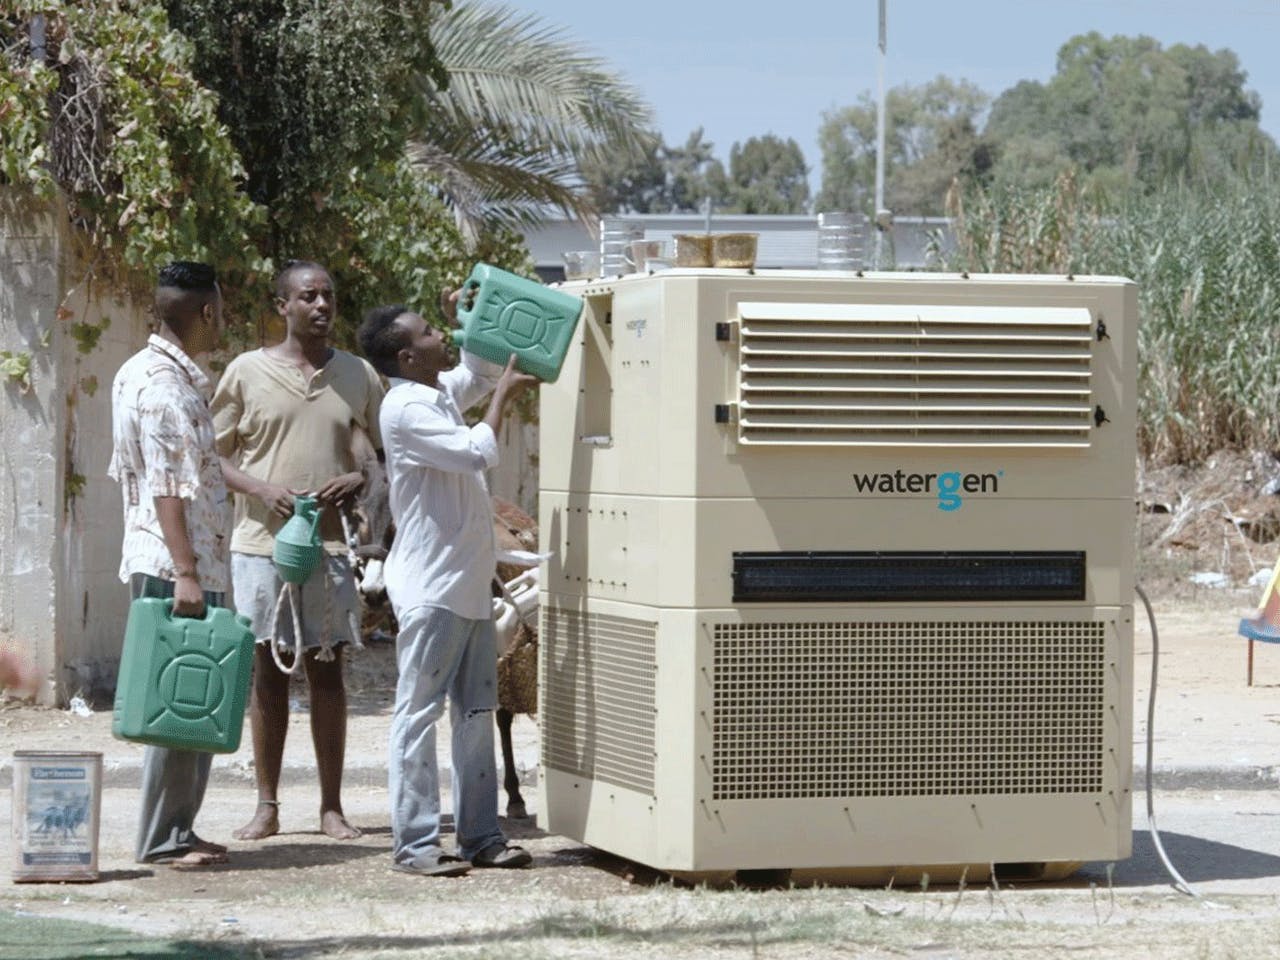 Israeli Solutions to the World’s Drinking Water Problems